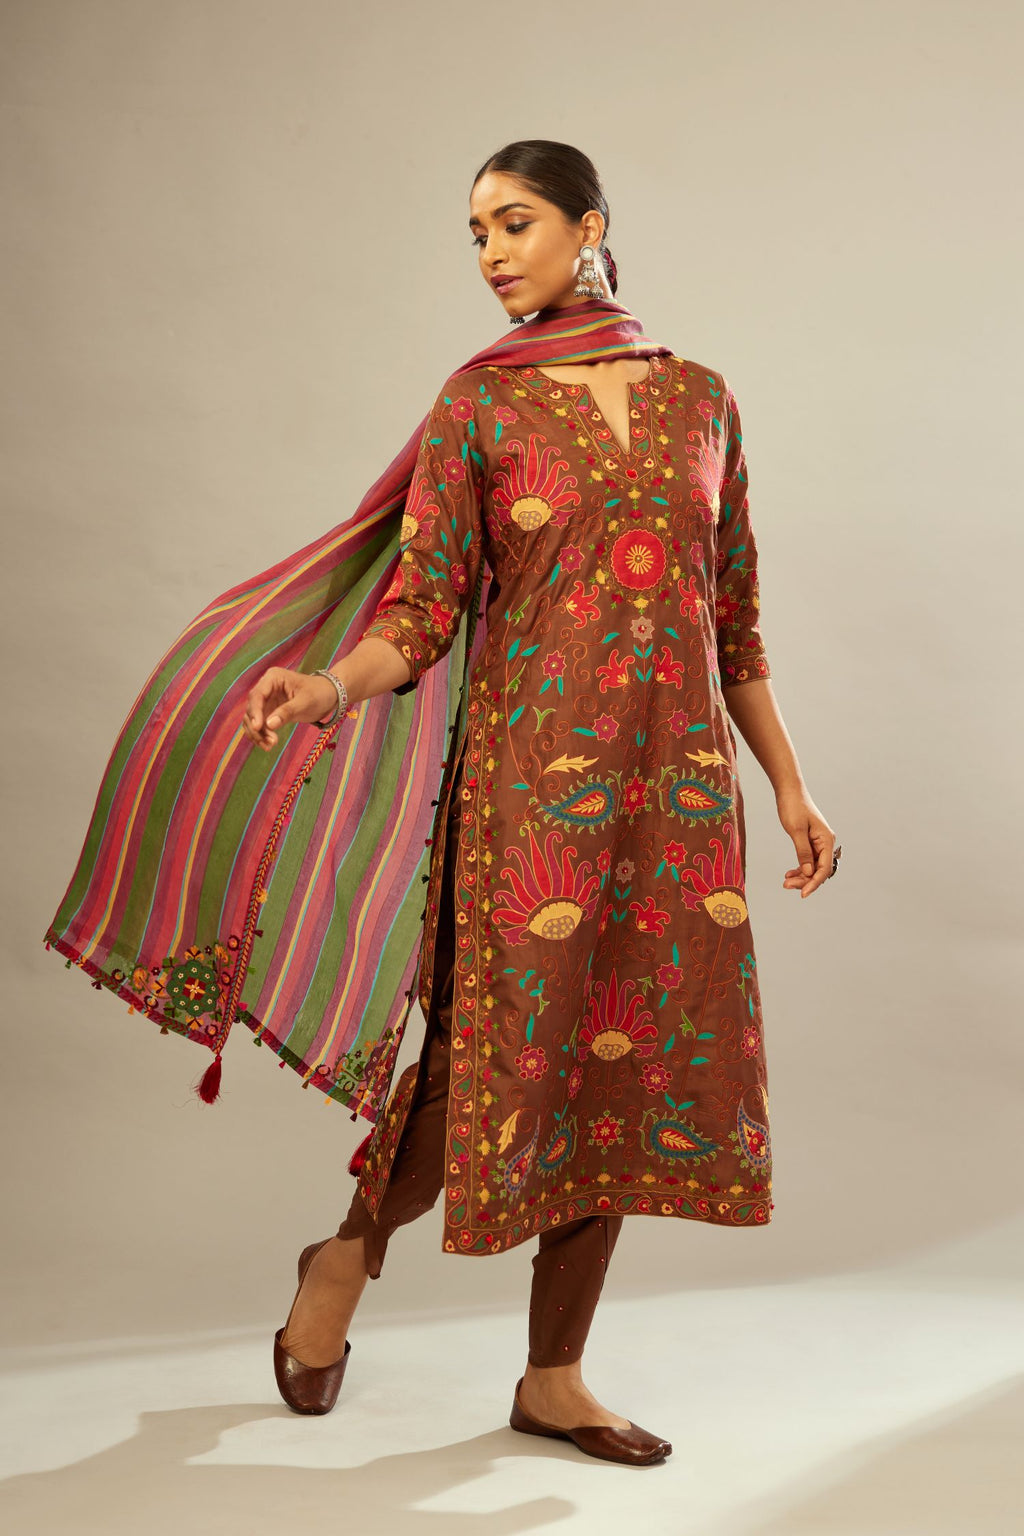 Brown straight kurta set, fully embroidered with bold appliqué flowers, multi-colored aari threadwork and silk tassels.